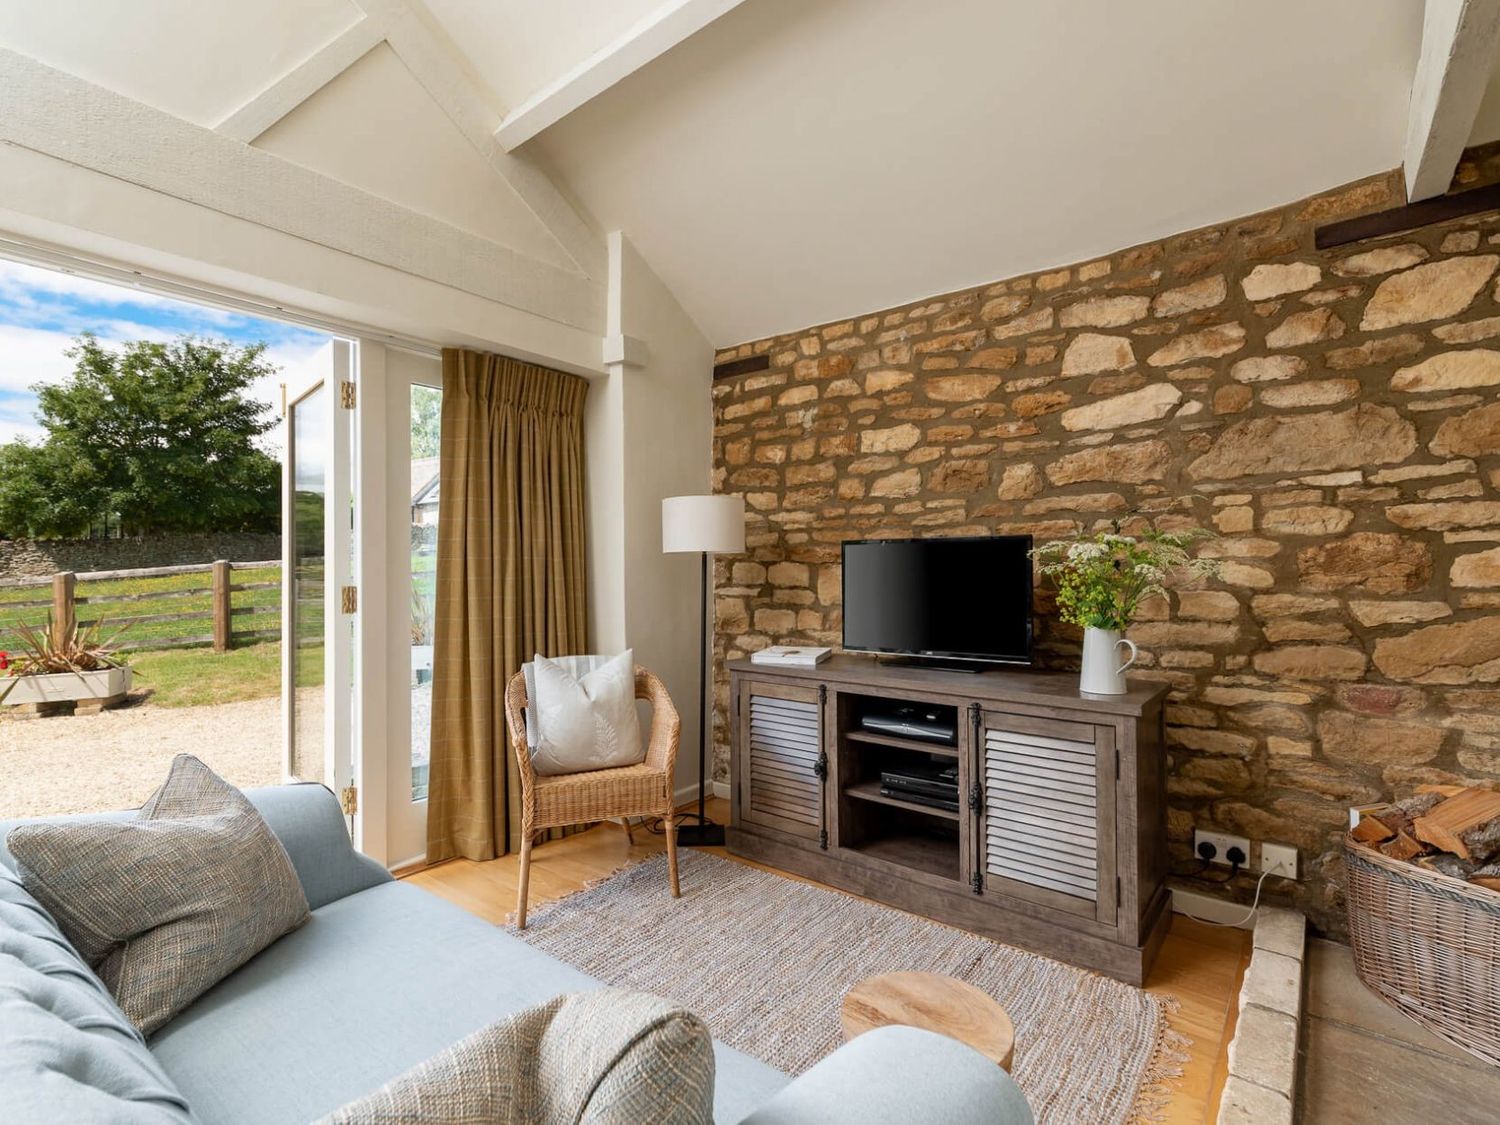 Oxbow Cottage - Cotswolds - 1091382 - photo 1